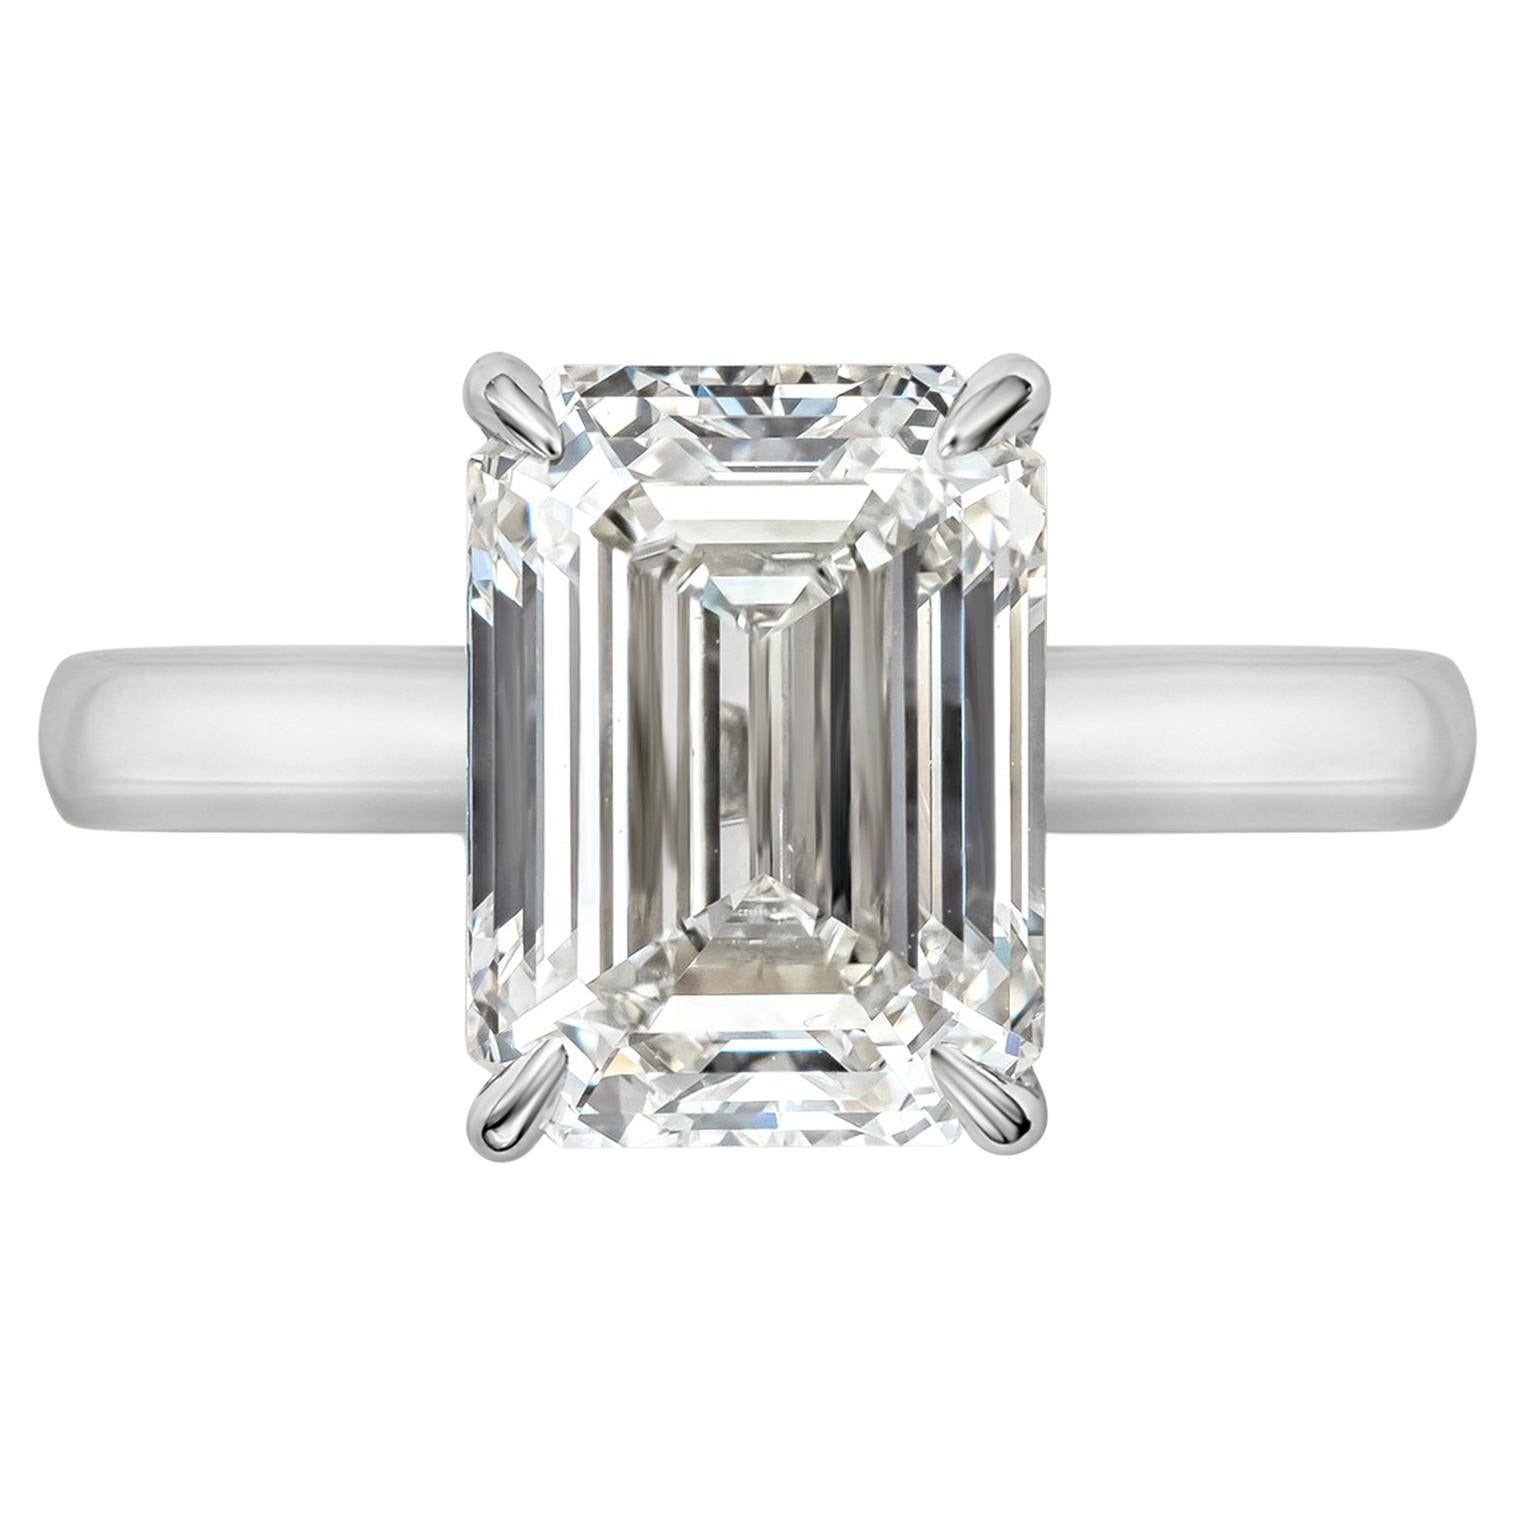 GIA Certified 3.53 Carats Total Emerald Cut Diamond Solitaire Engagement Ring